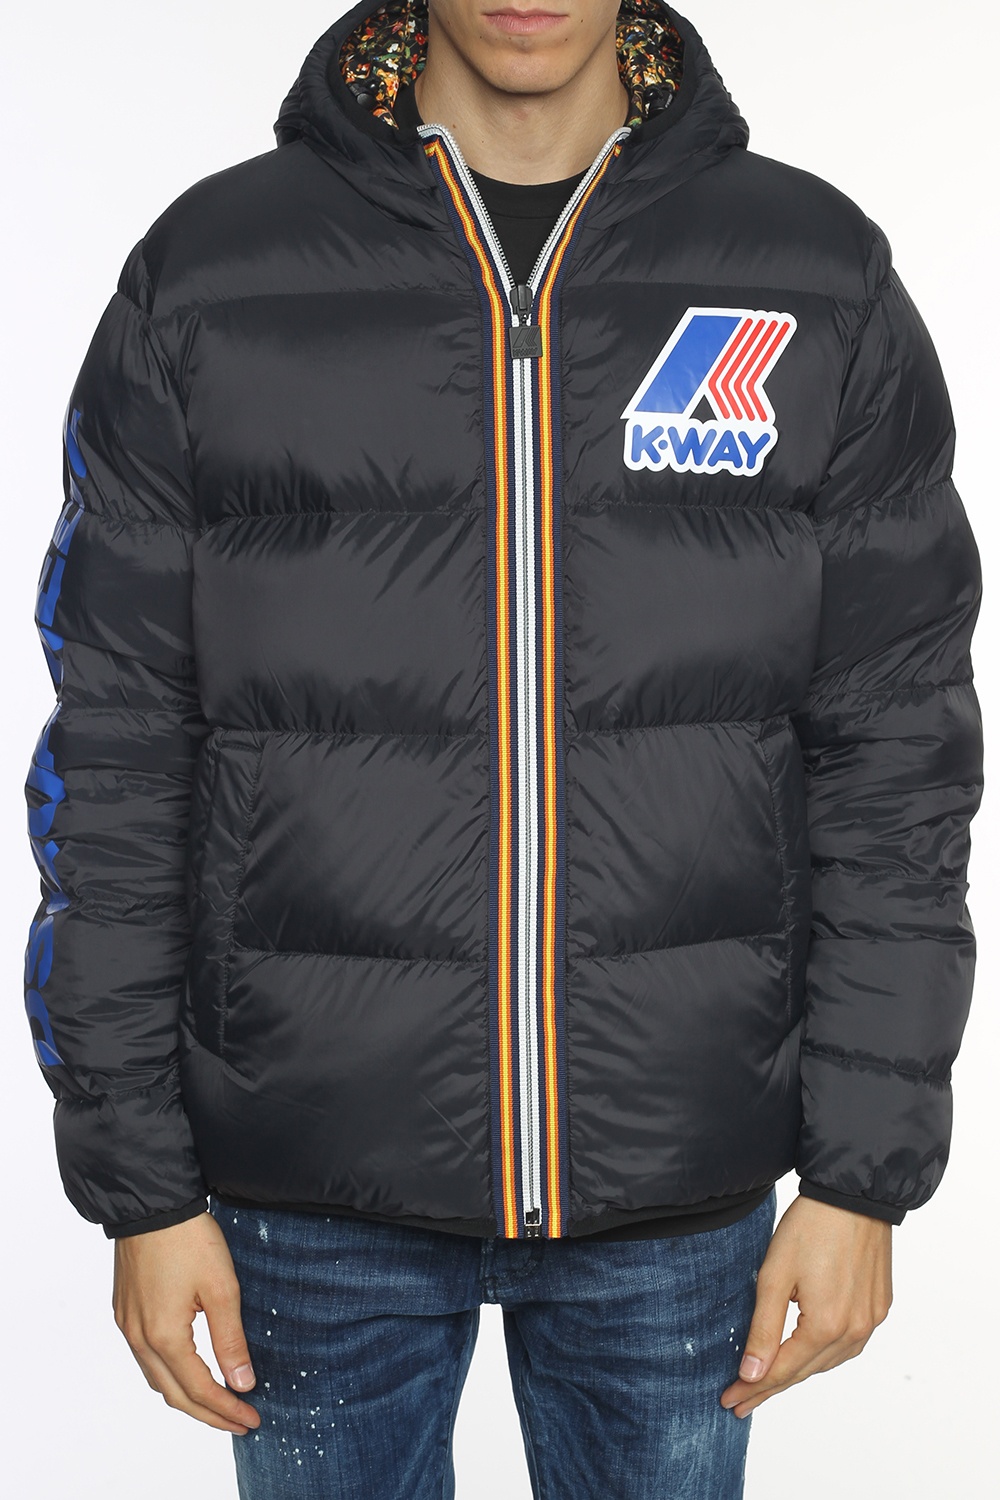 kway x dsquared